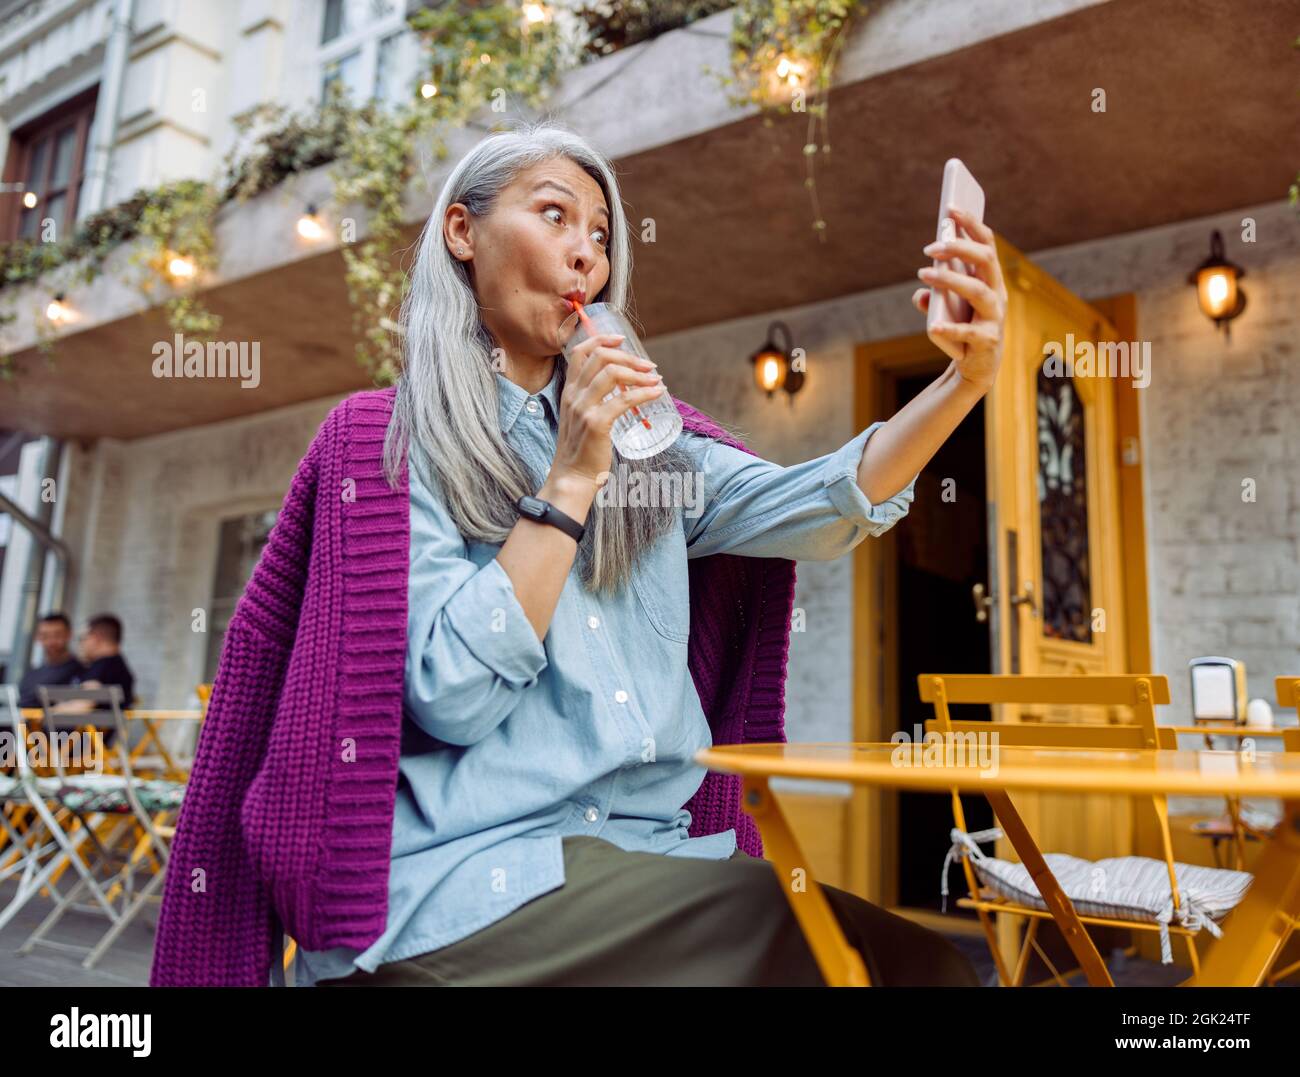 Funny senior Asian woman drinks water through straw taking selfie at cafe table outdoors low angle view Stock Photo